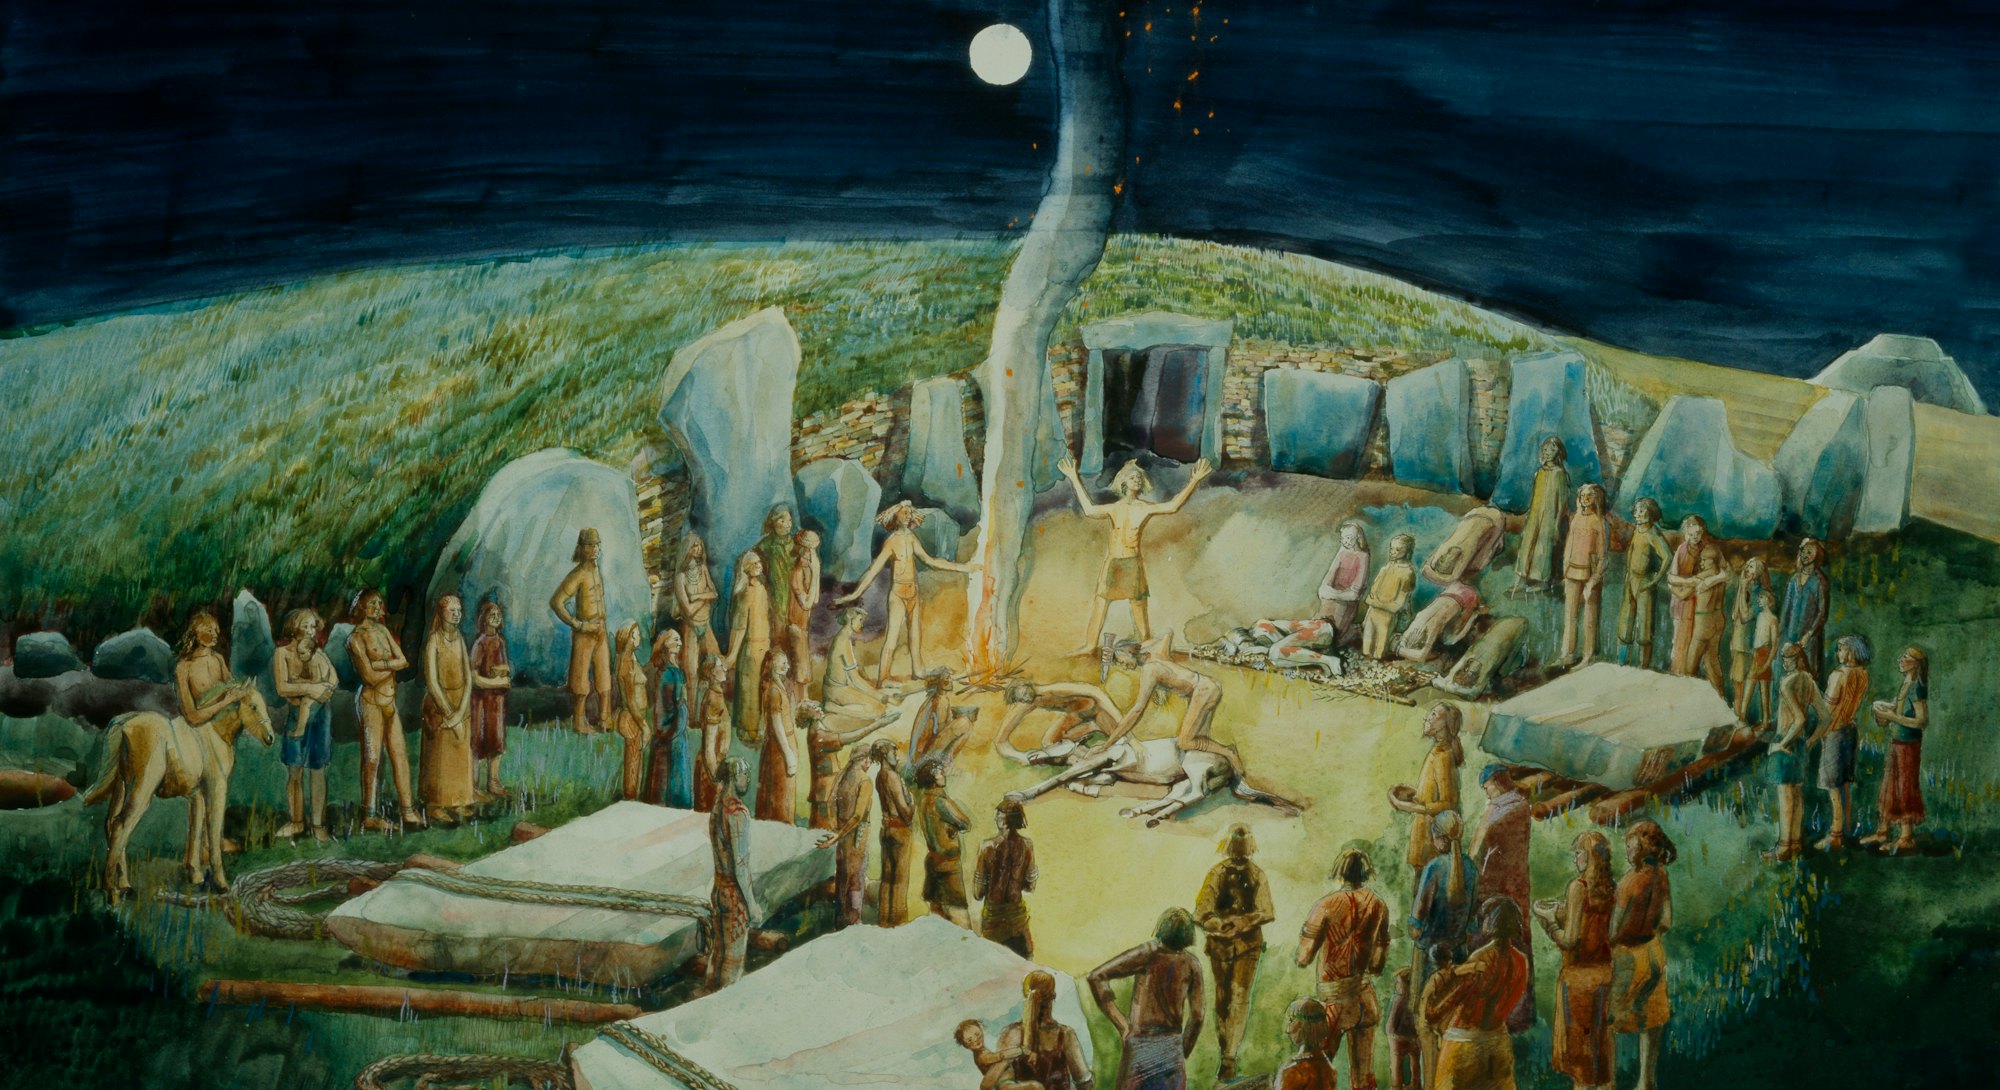 Neolithic ceremony at West Kennet Long Barrow, Wilshire, circa 1985-c2012. Reconstruction drawing. A...